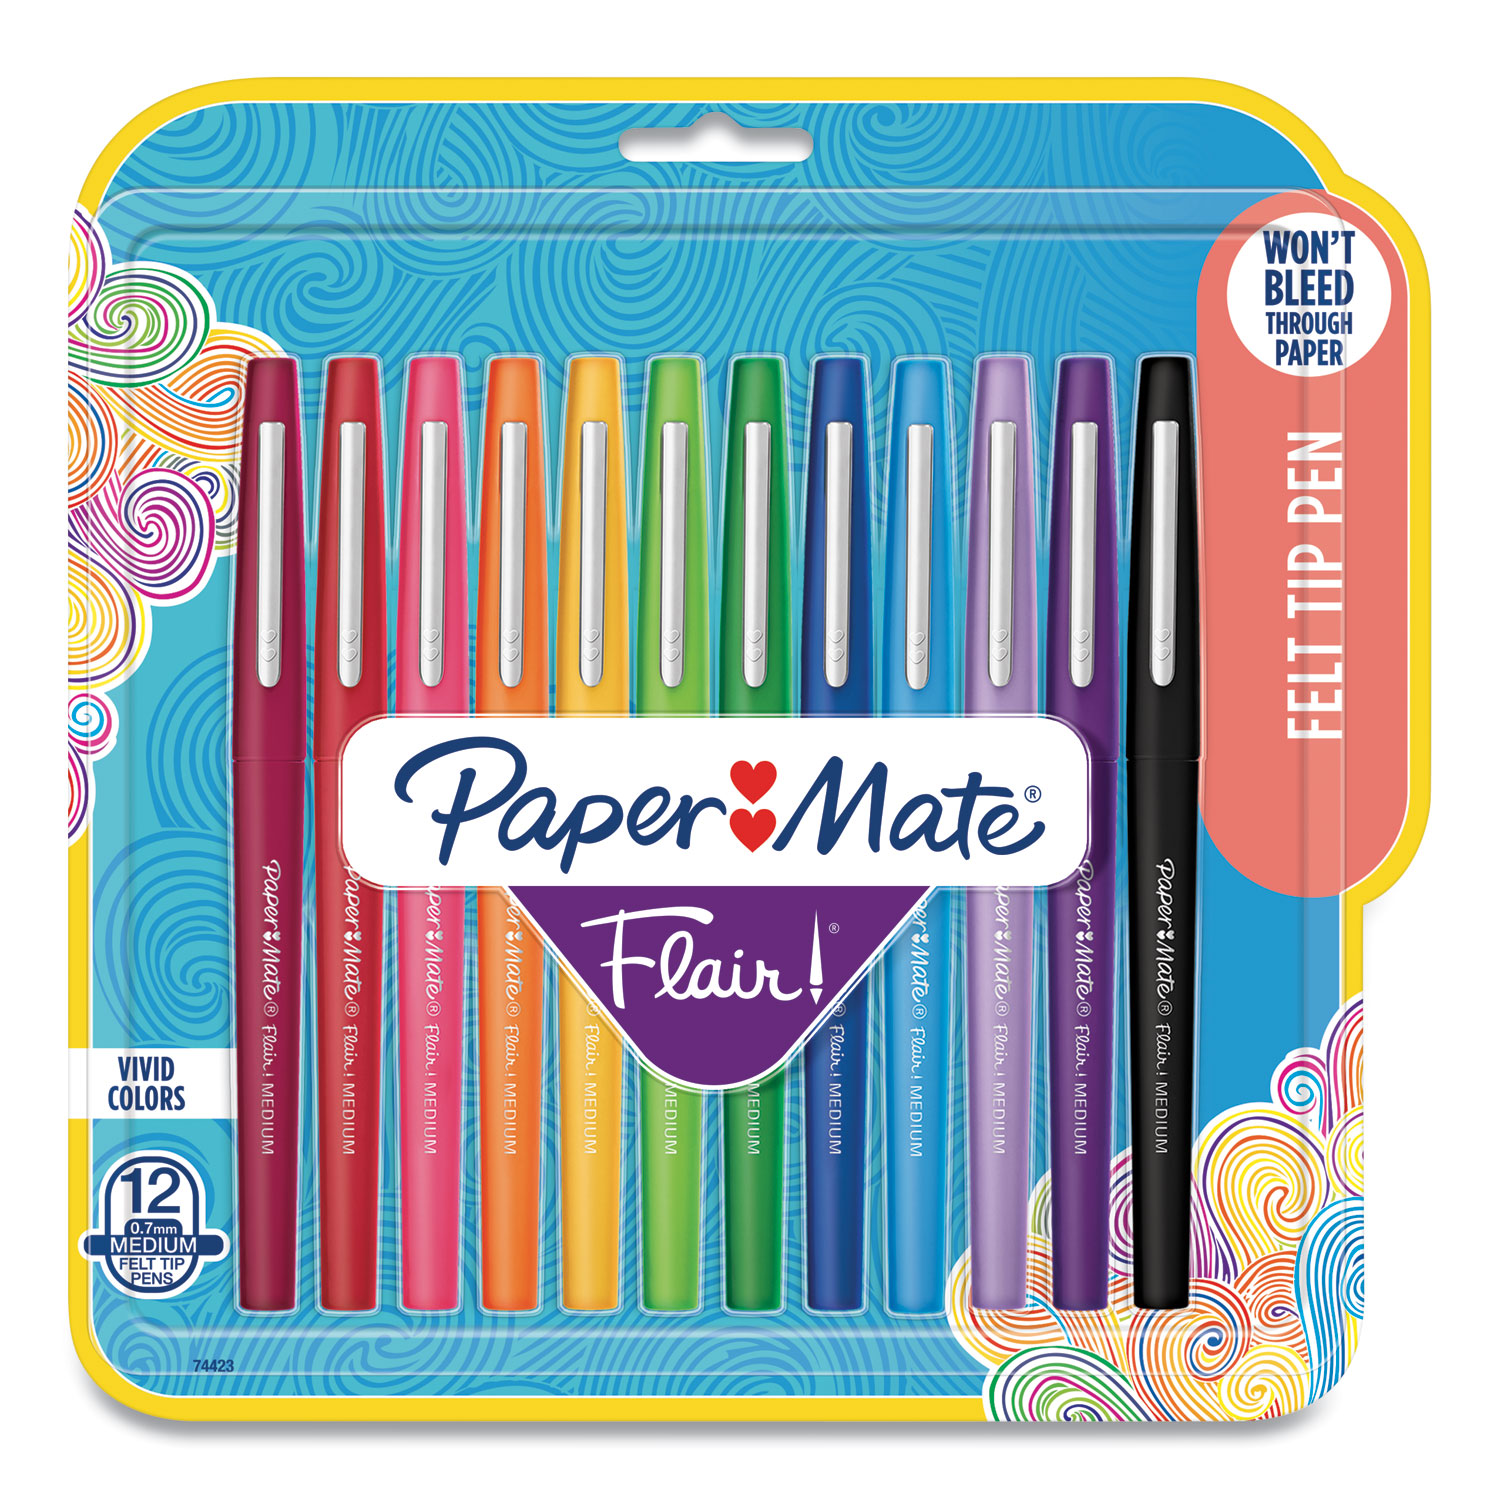 Point Guard Flair Felt Tip Porous Point Pen, Stick, Medium 0.7 mm, Assorted Ink and Barrel Colors, 12/Pack